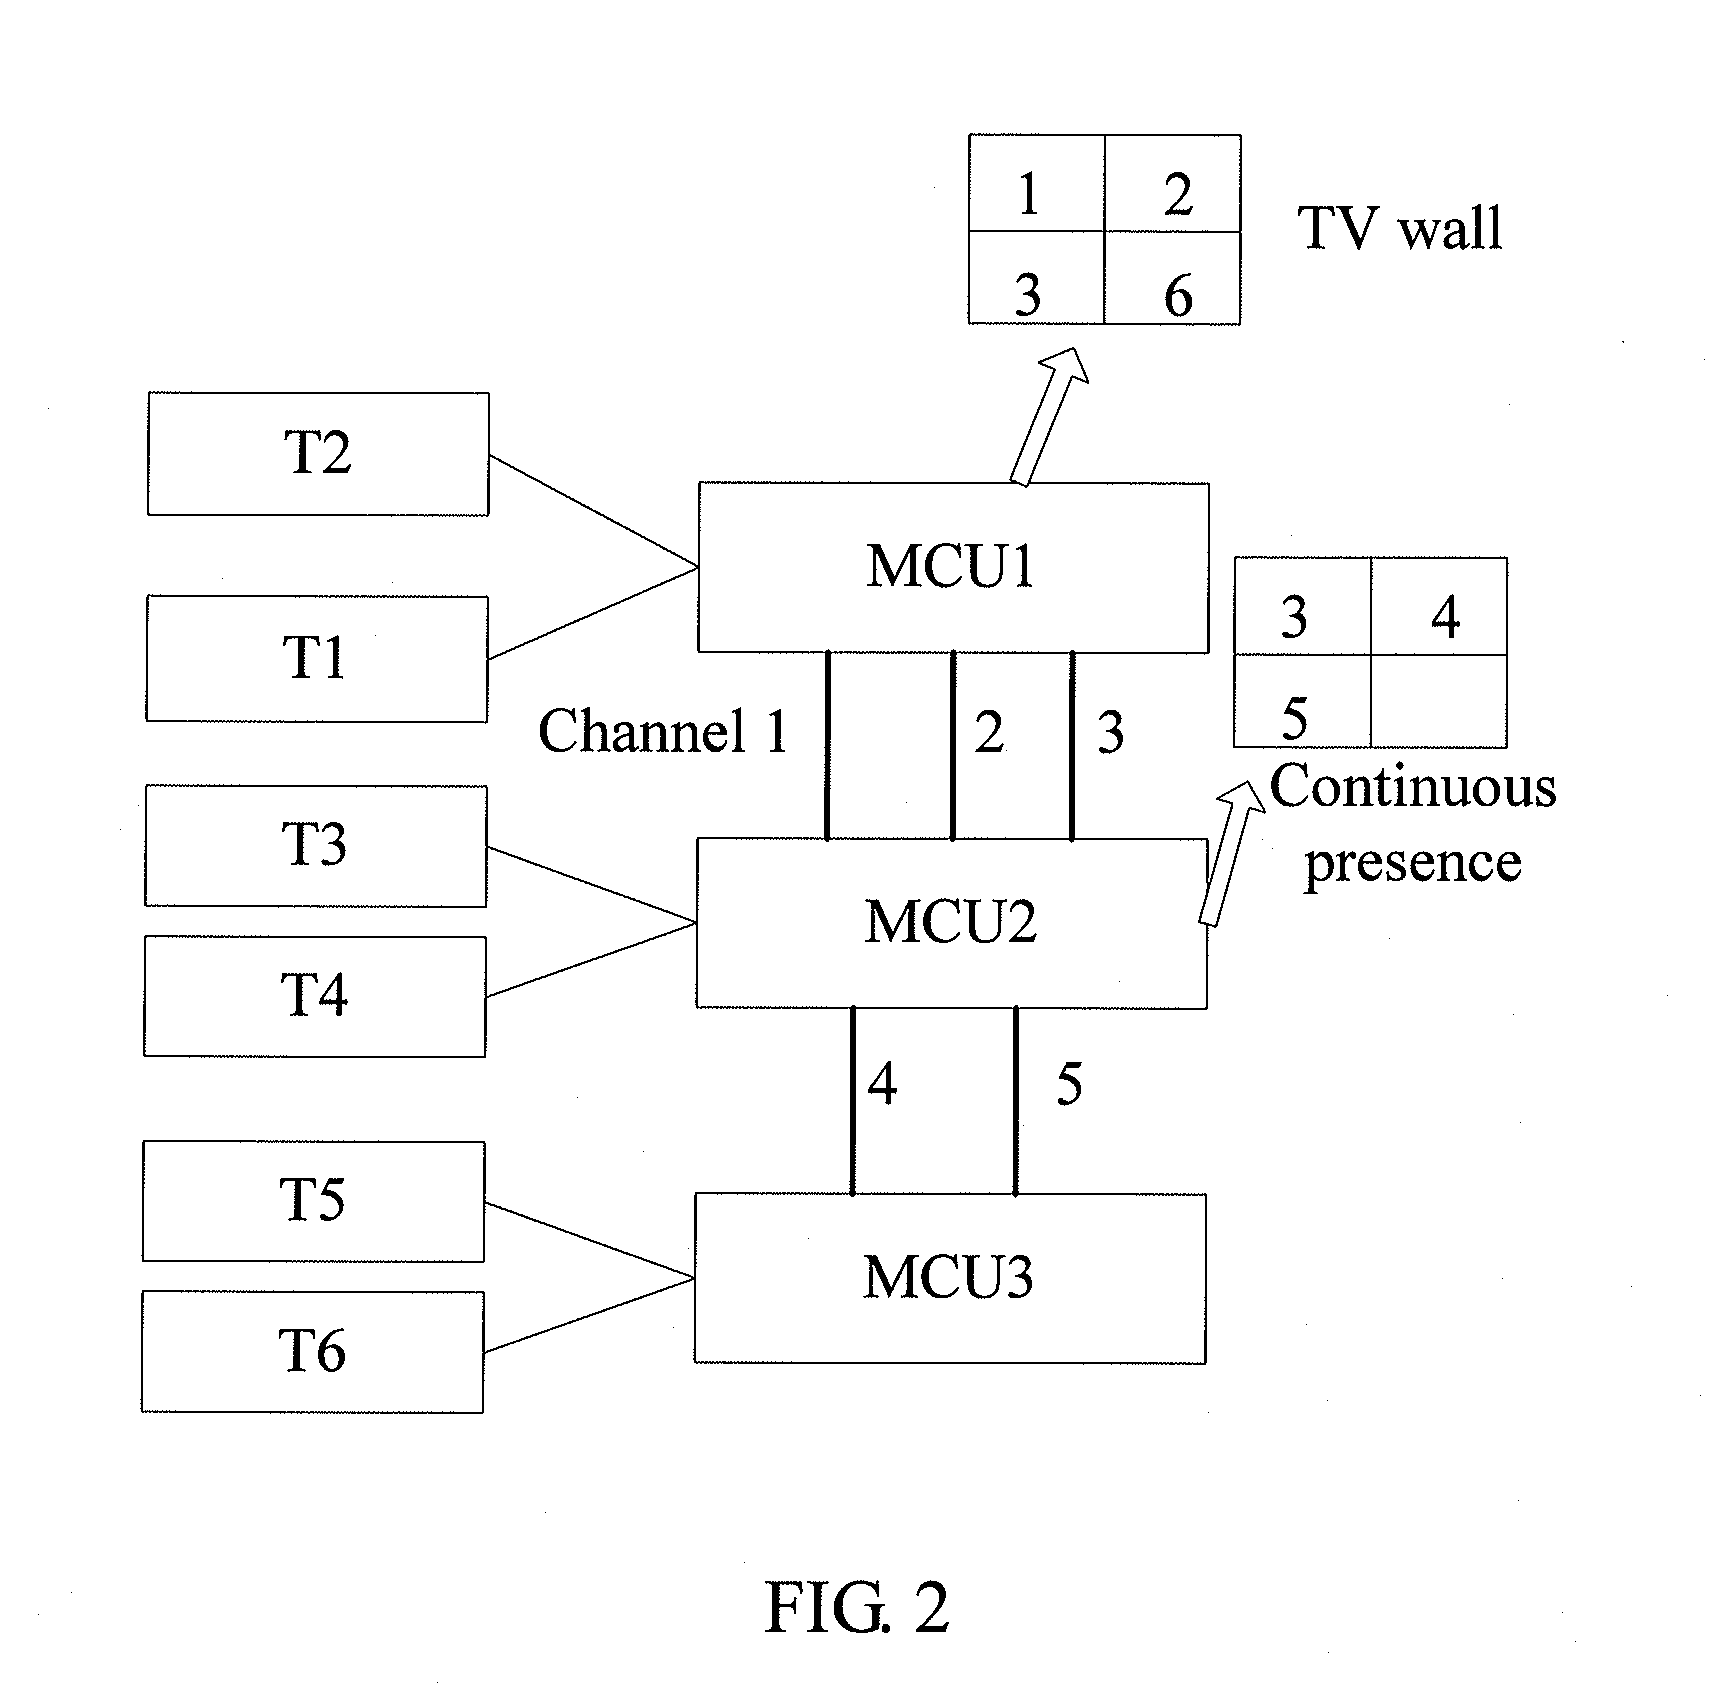 Method, device and system for controlling multichannel cascade between two media control servers